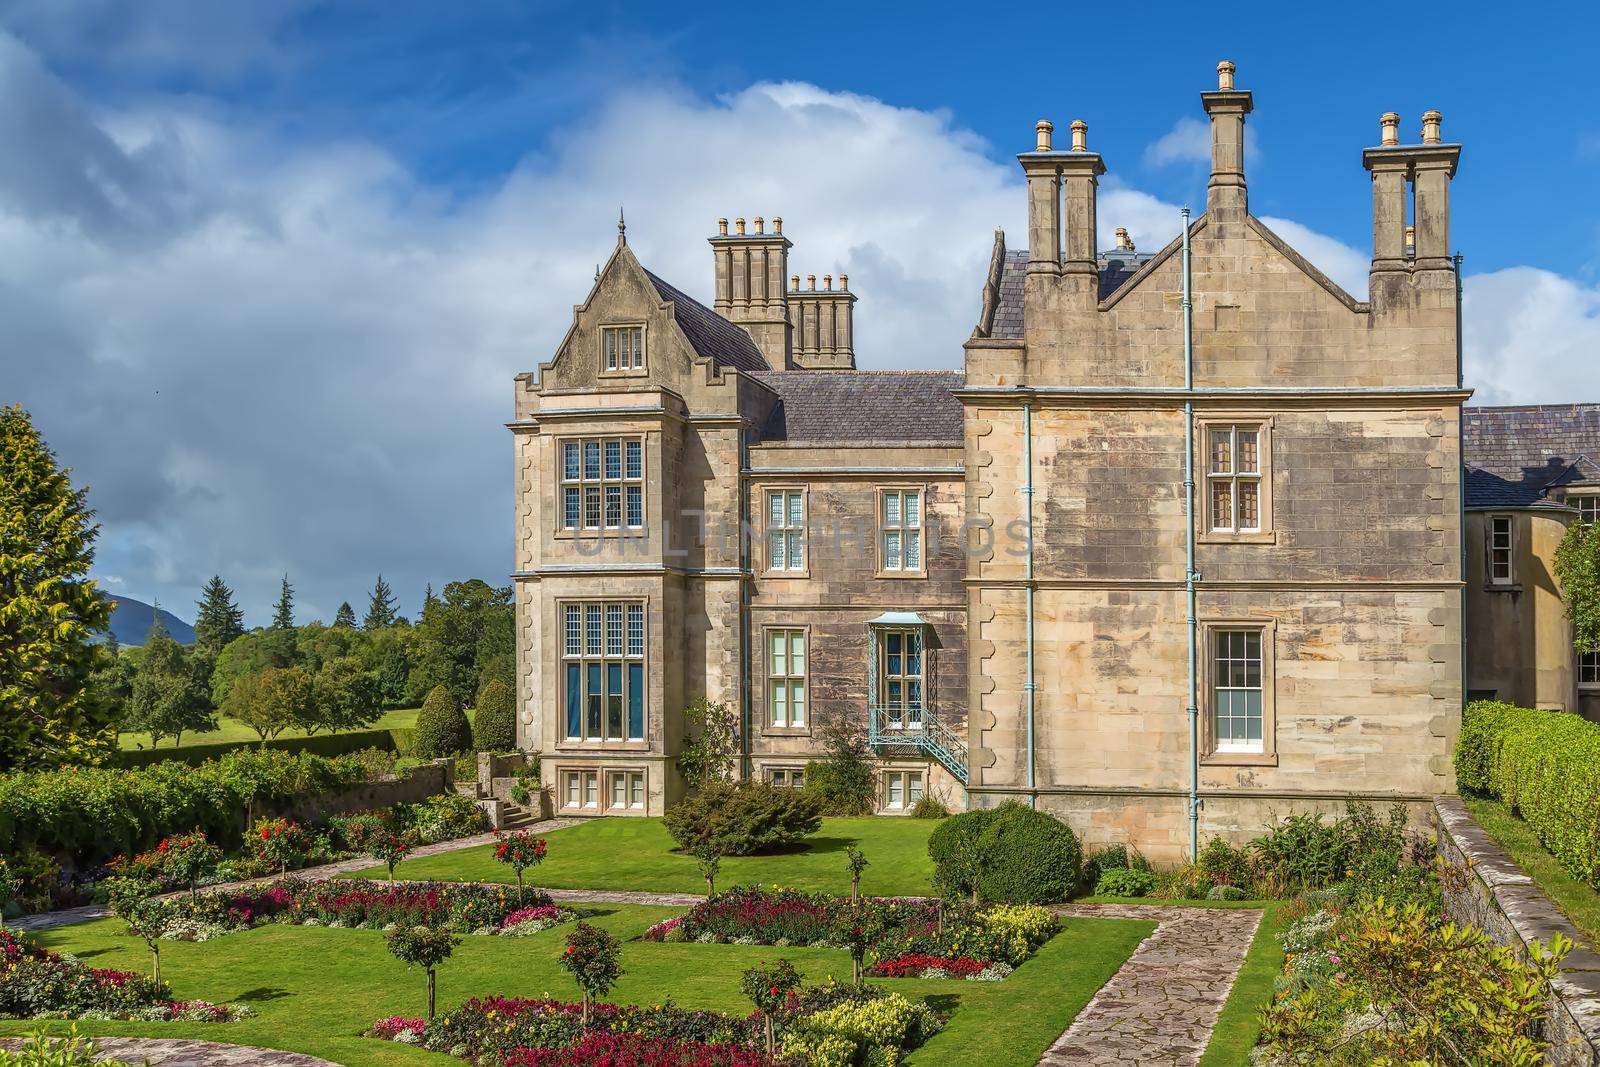 Muckross House is located between two of the lakes of Killarney in County Kerry, Ireland. 